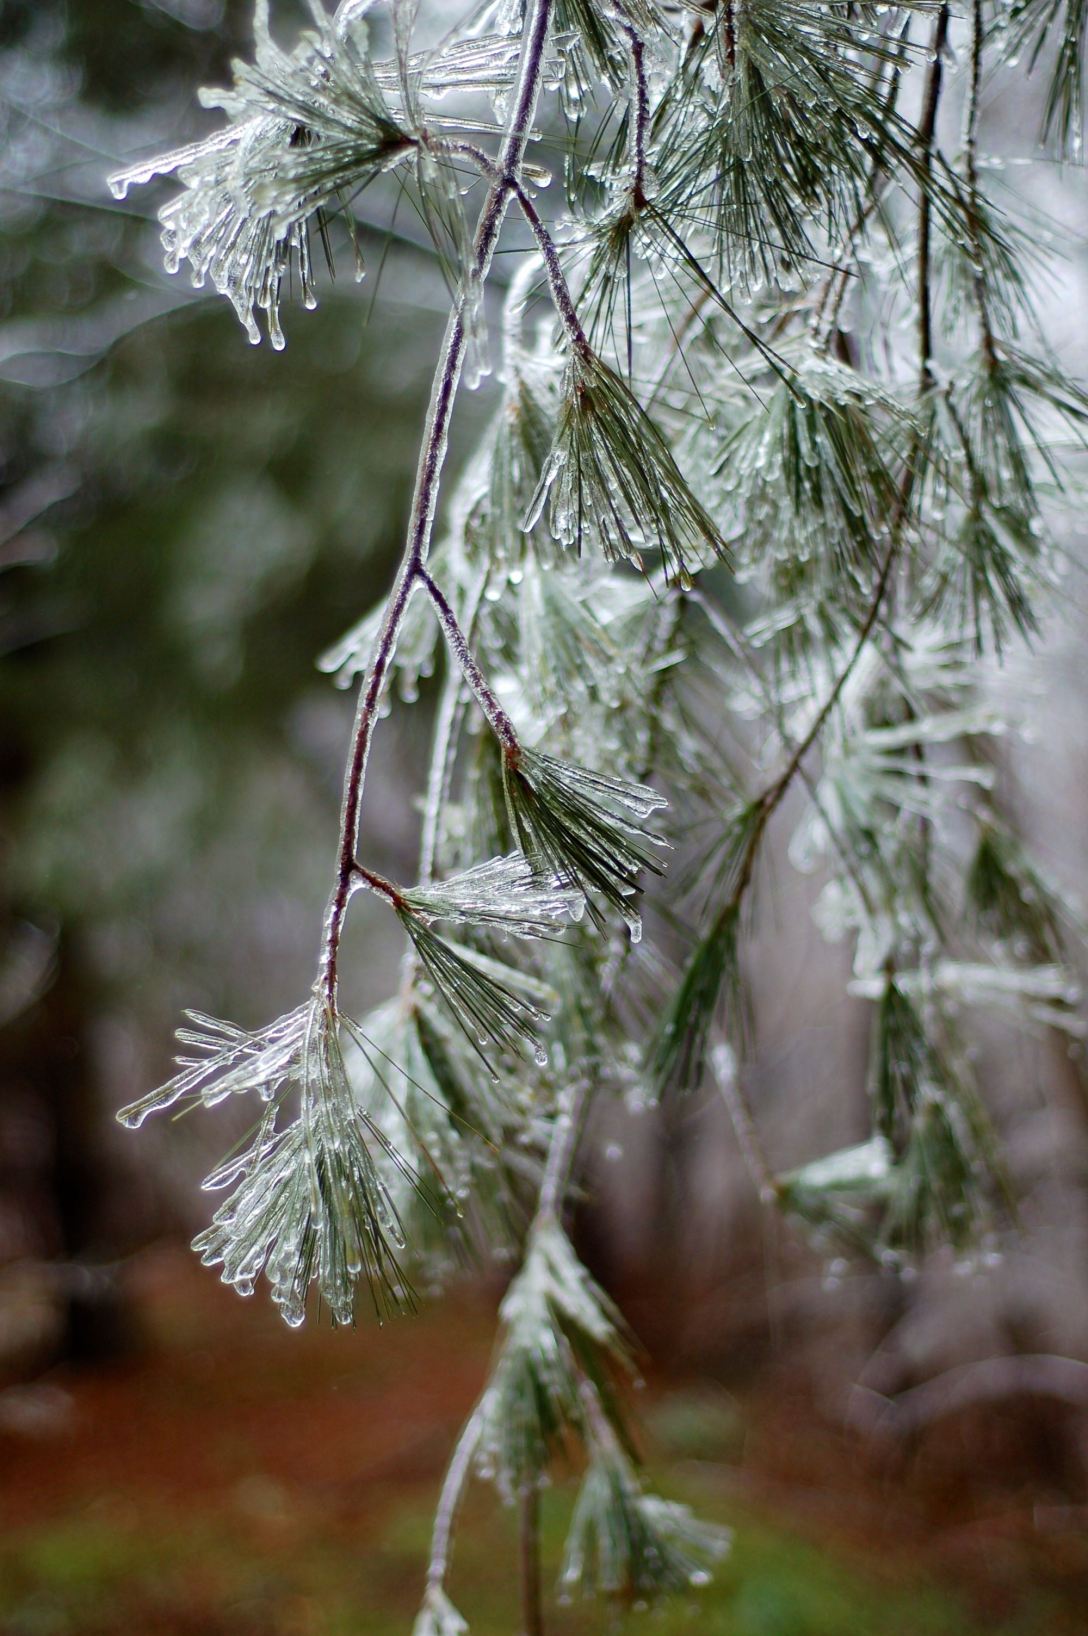 Iced pine branches by Andrea Badgley on Butterfly Mind